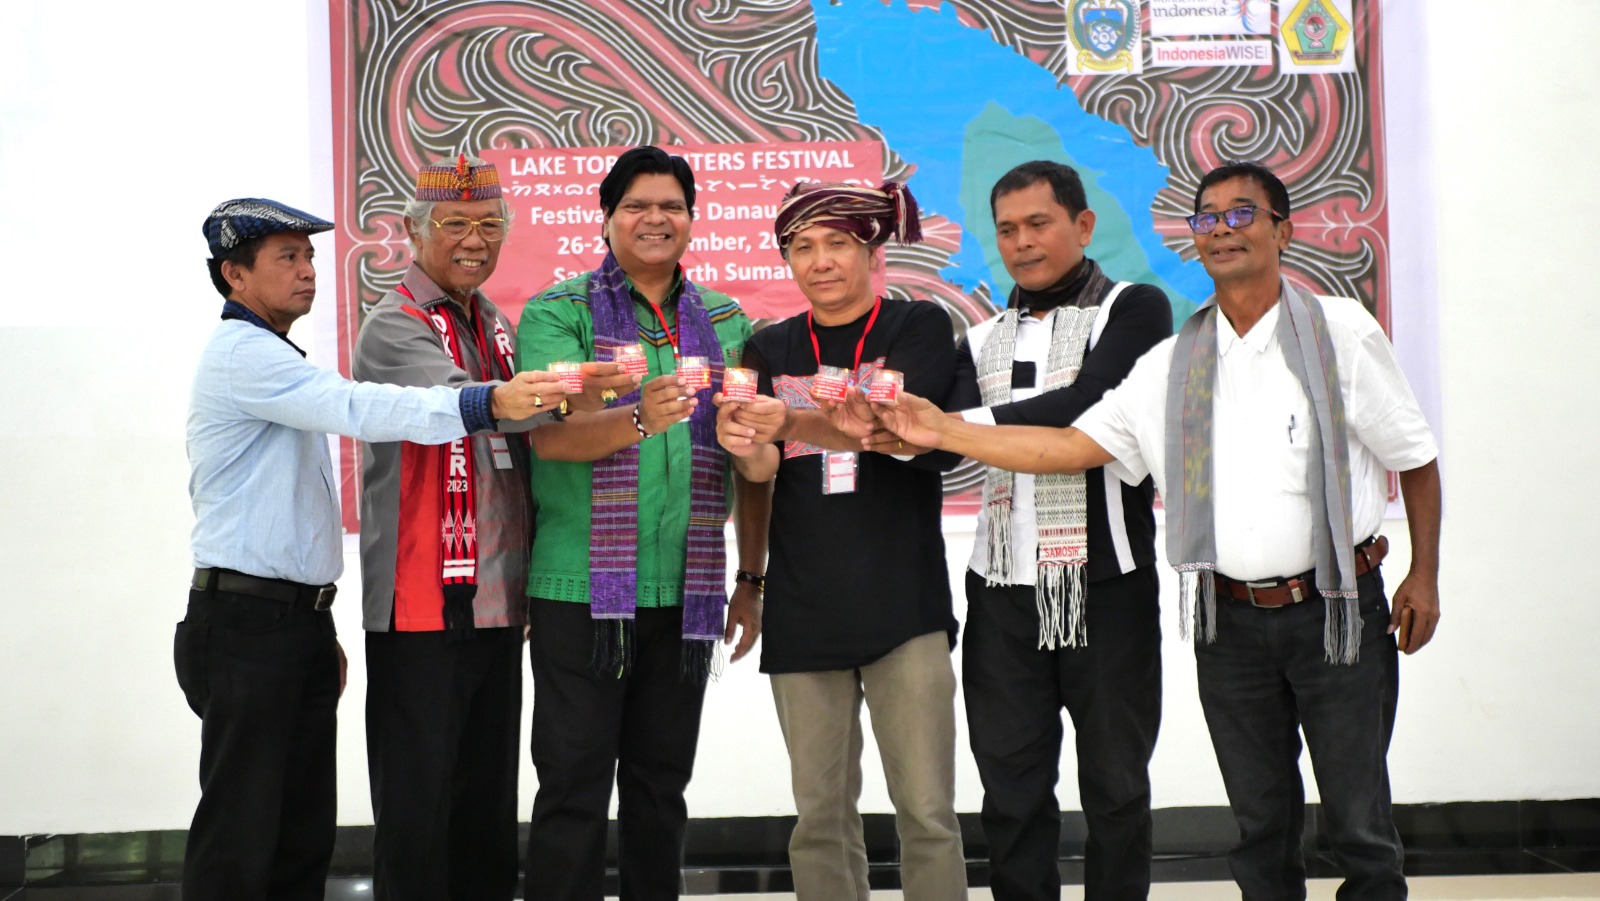 Three co-visionaries Saut Poltak Tambunan (second from left), Amol Titus (third from left) and Thomson Hutasoit (third from right) featured with some key speakers at the event